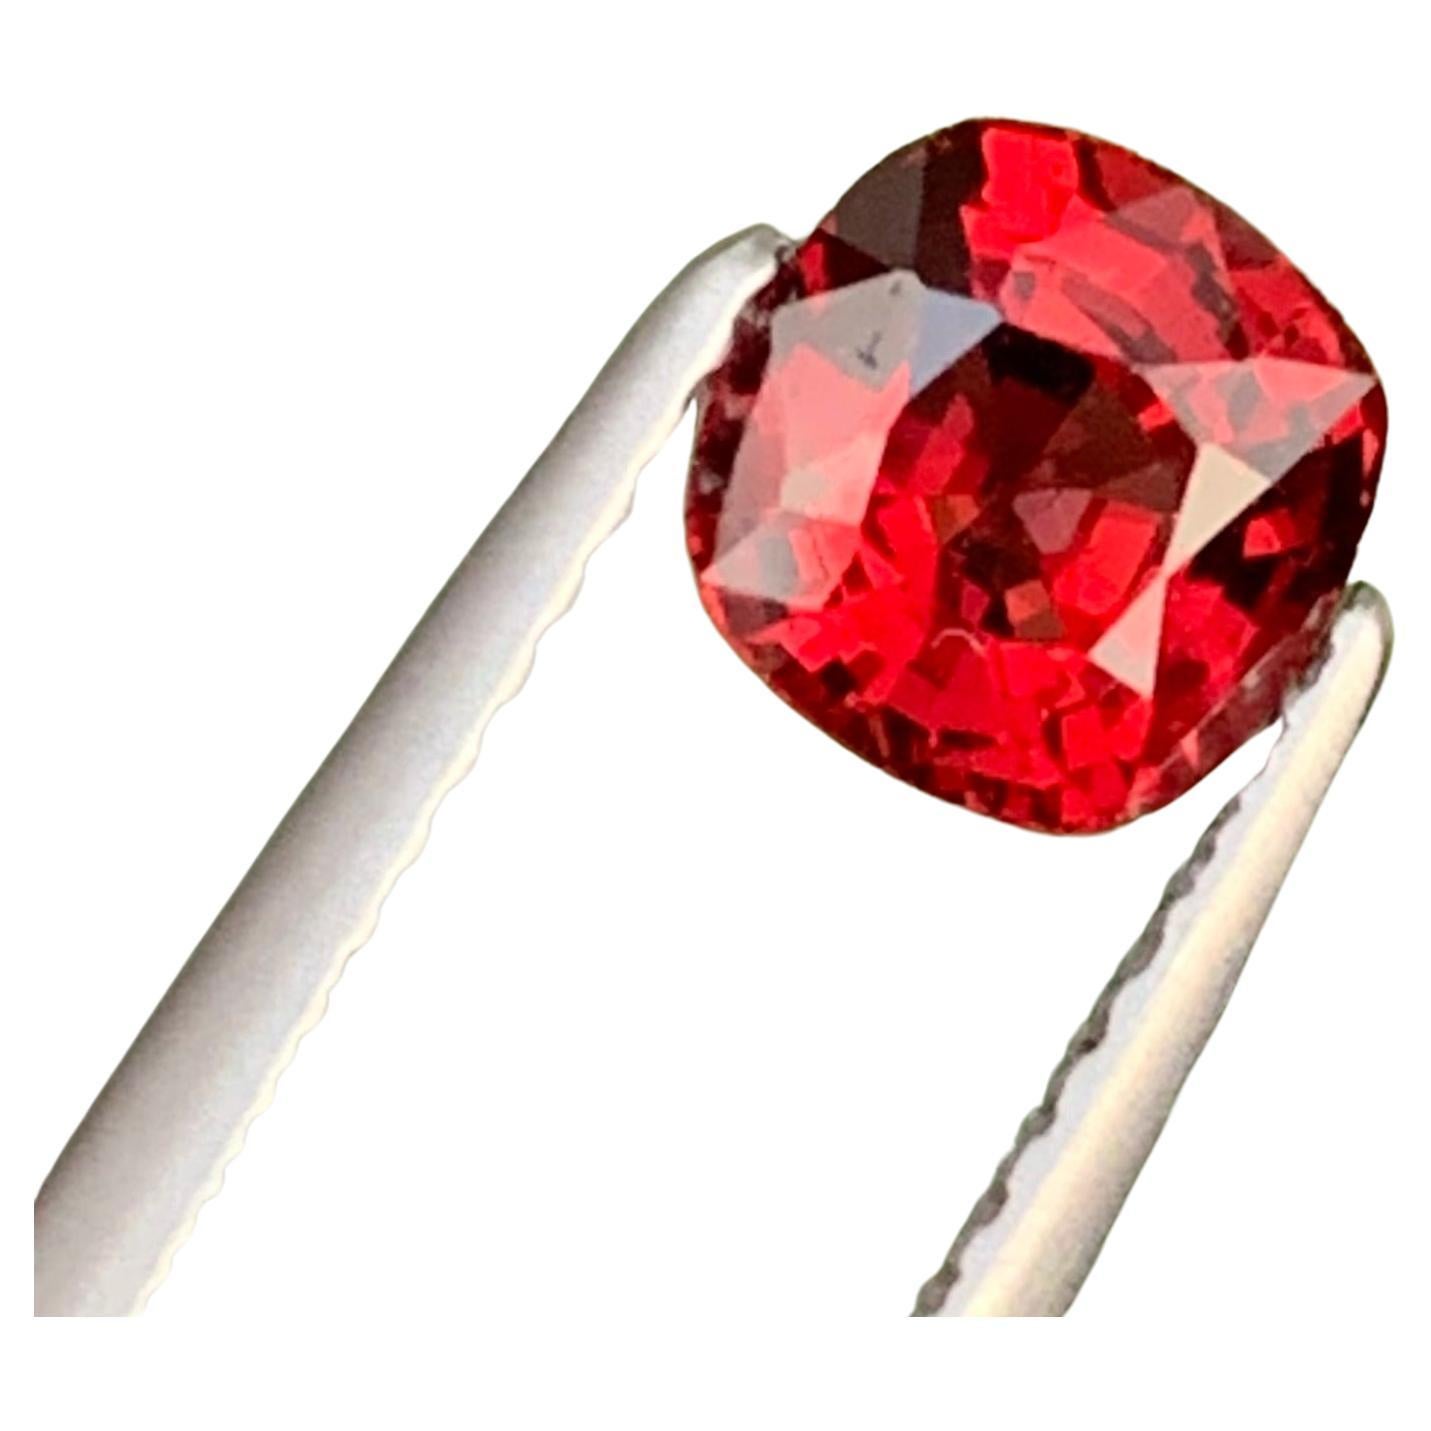 1.40 Carat Loose Burmese Red Spinel  Faceted Red Spinel from Myanmar For Sale